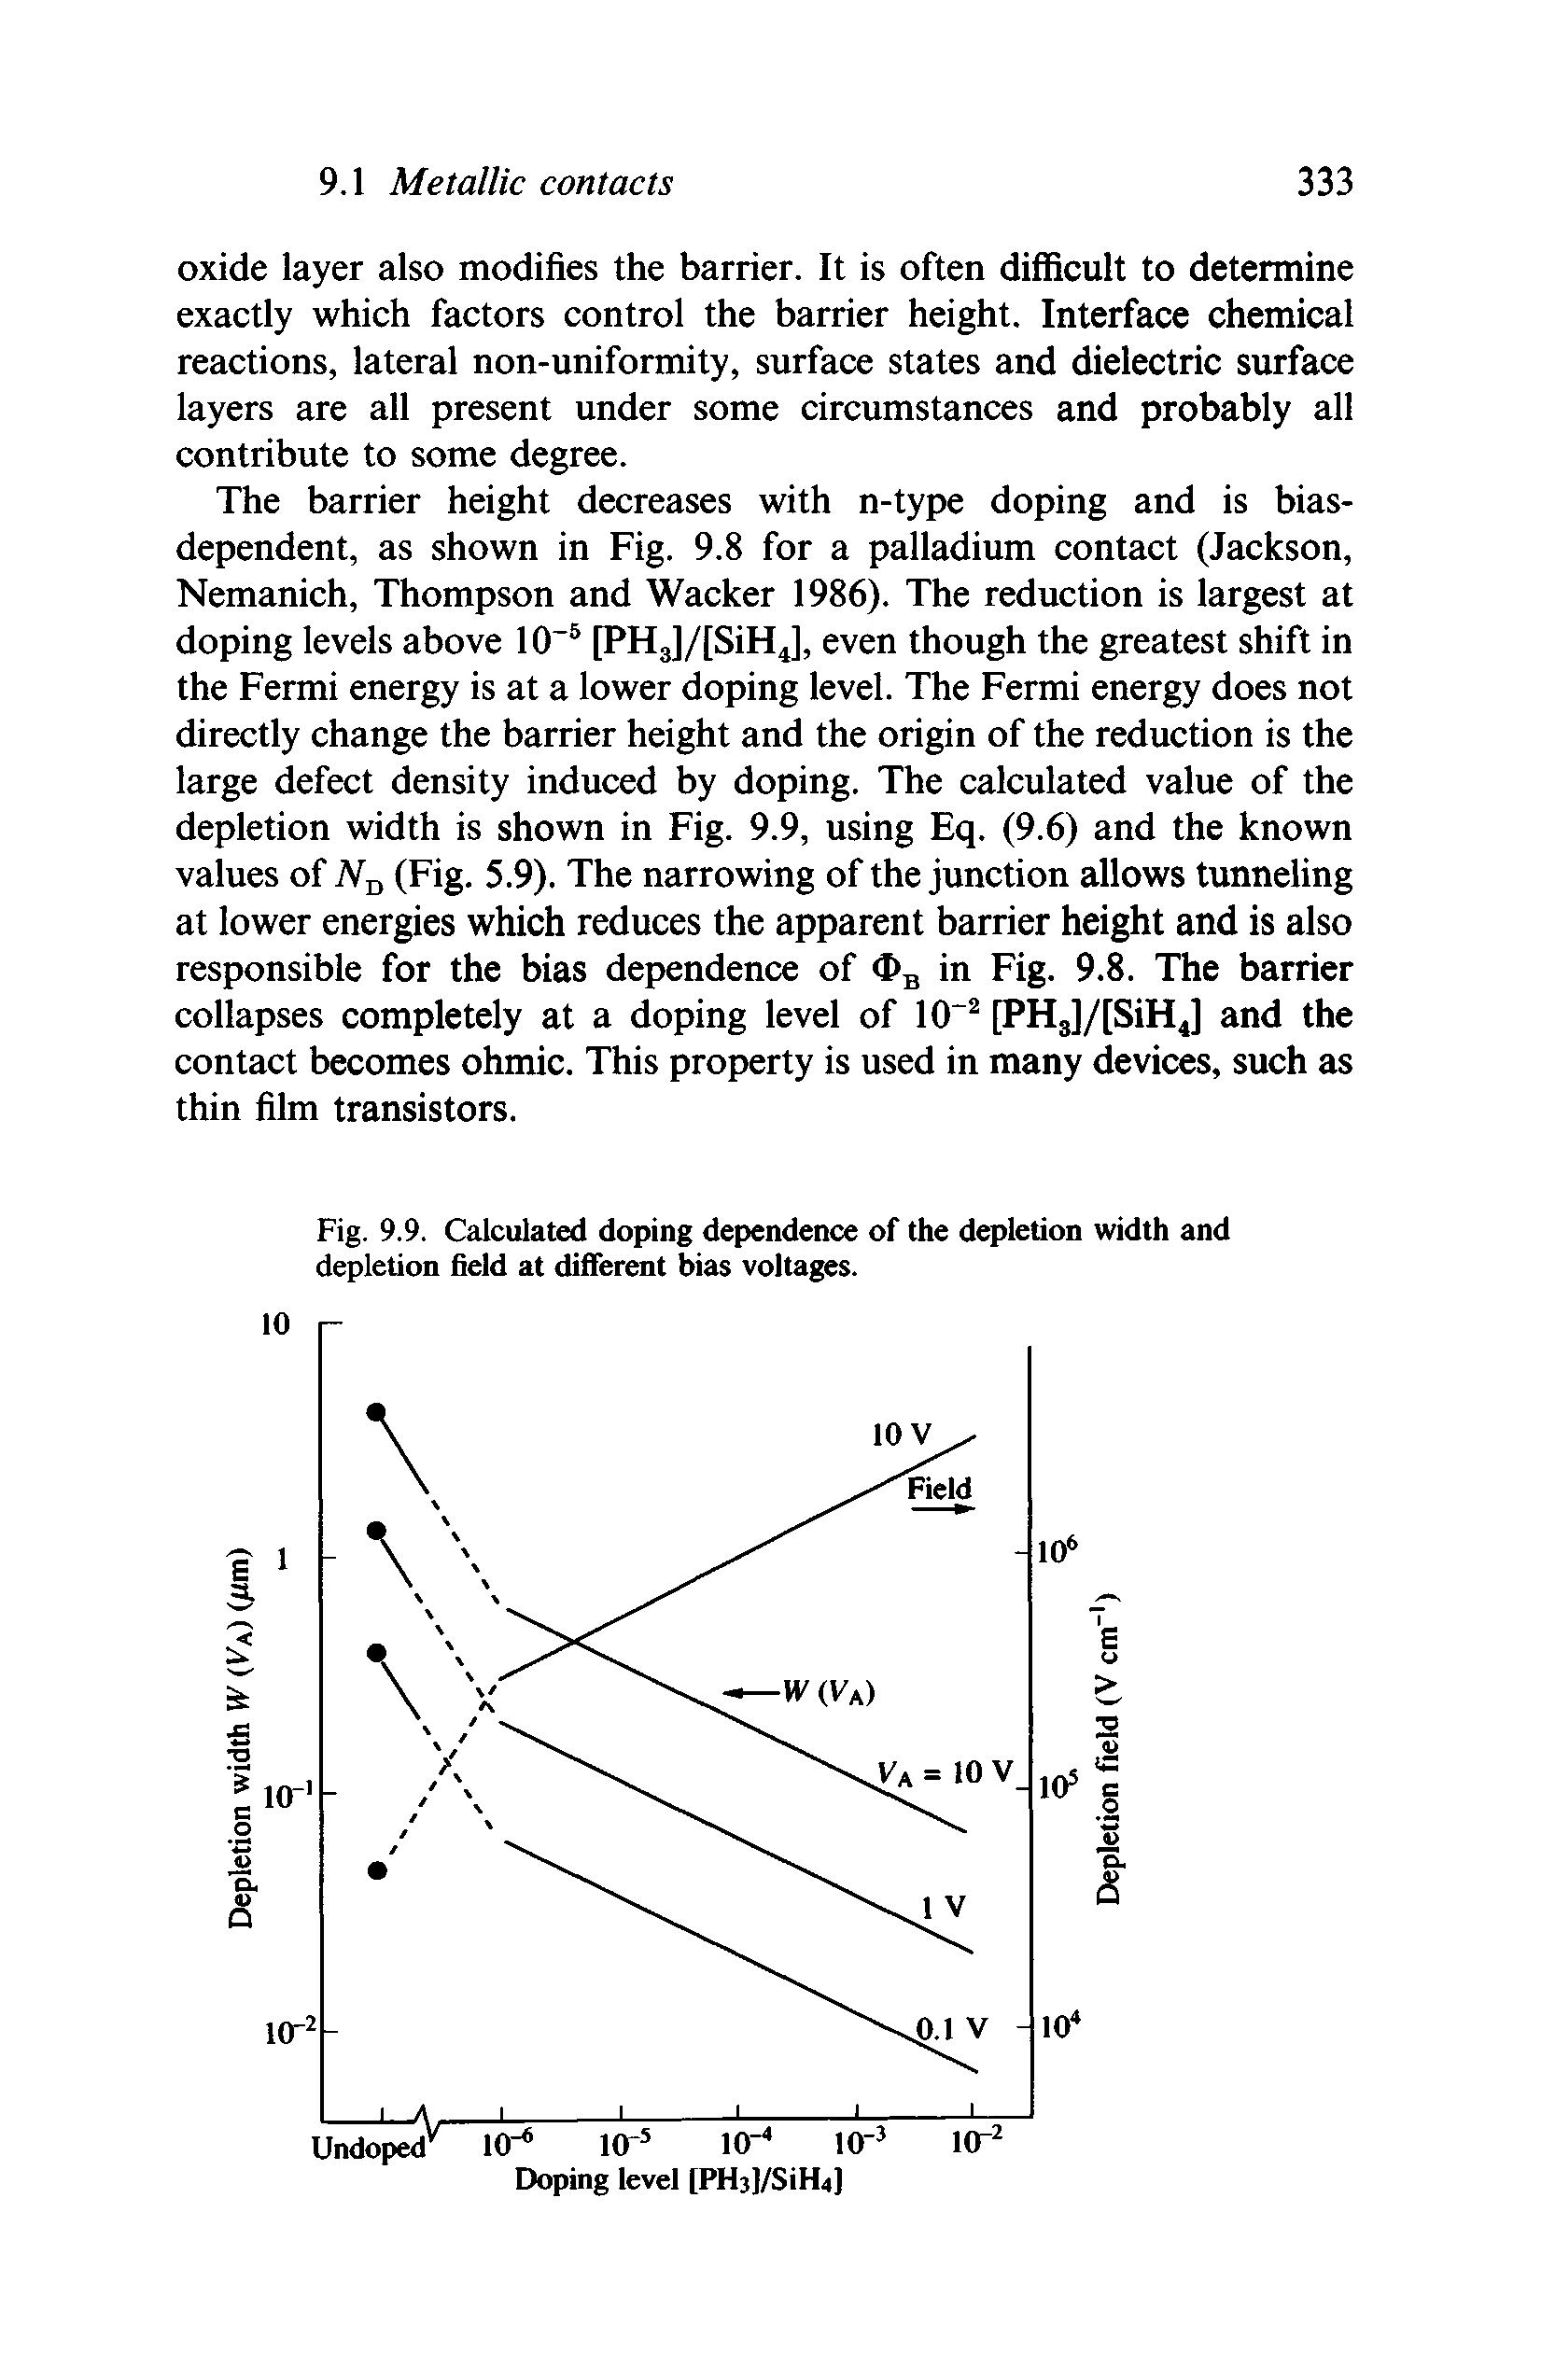 Fig. 9.9. Calculated doping dependence of the depletion width and depletion field at different bias voltages.